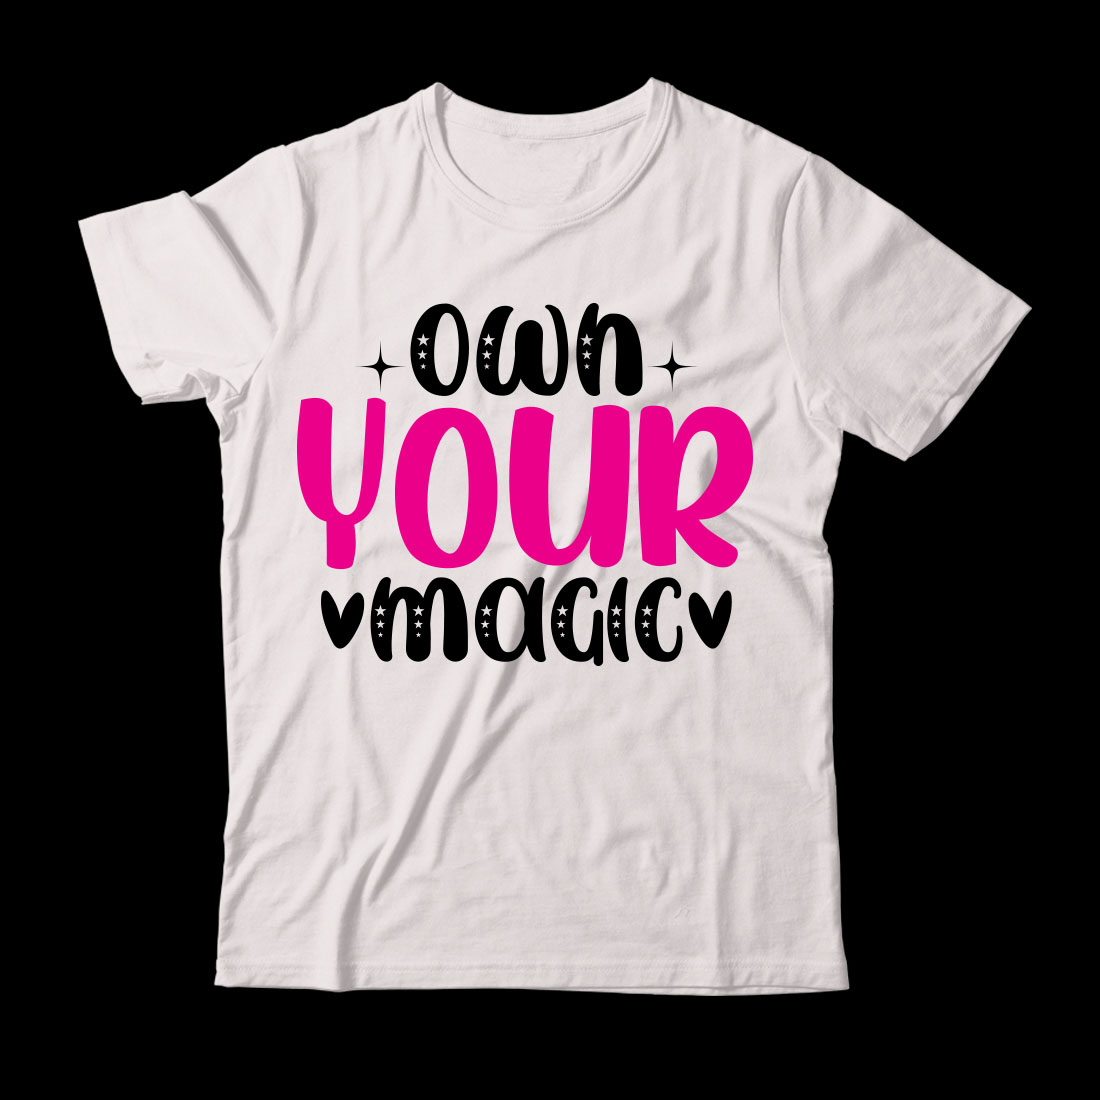 T - shirt that says own your magic.